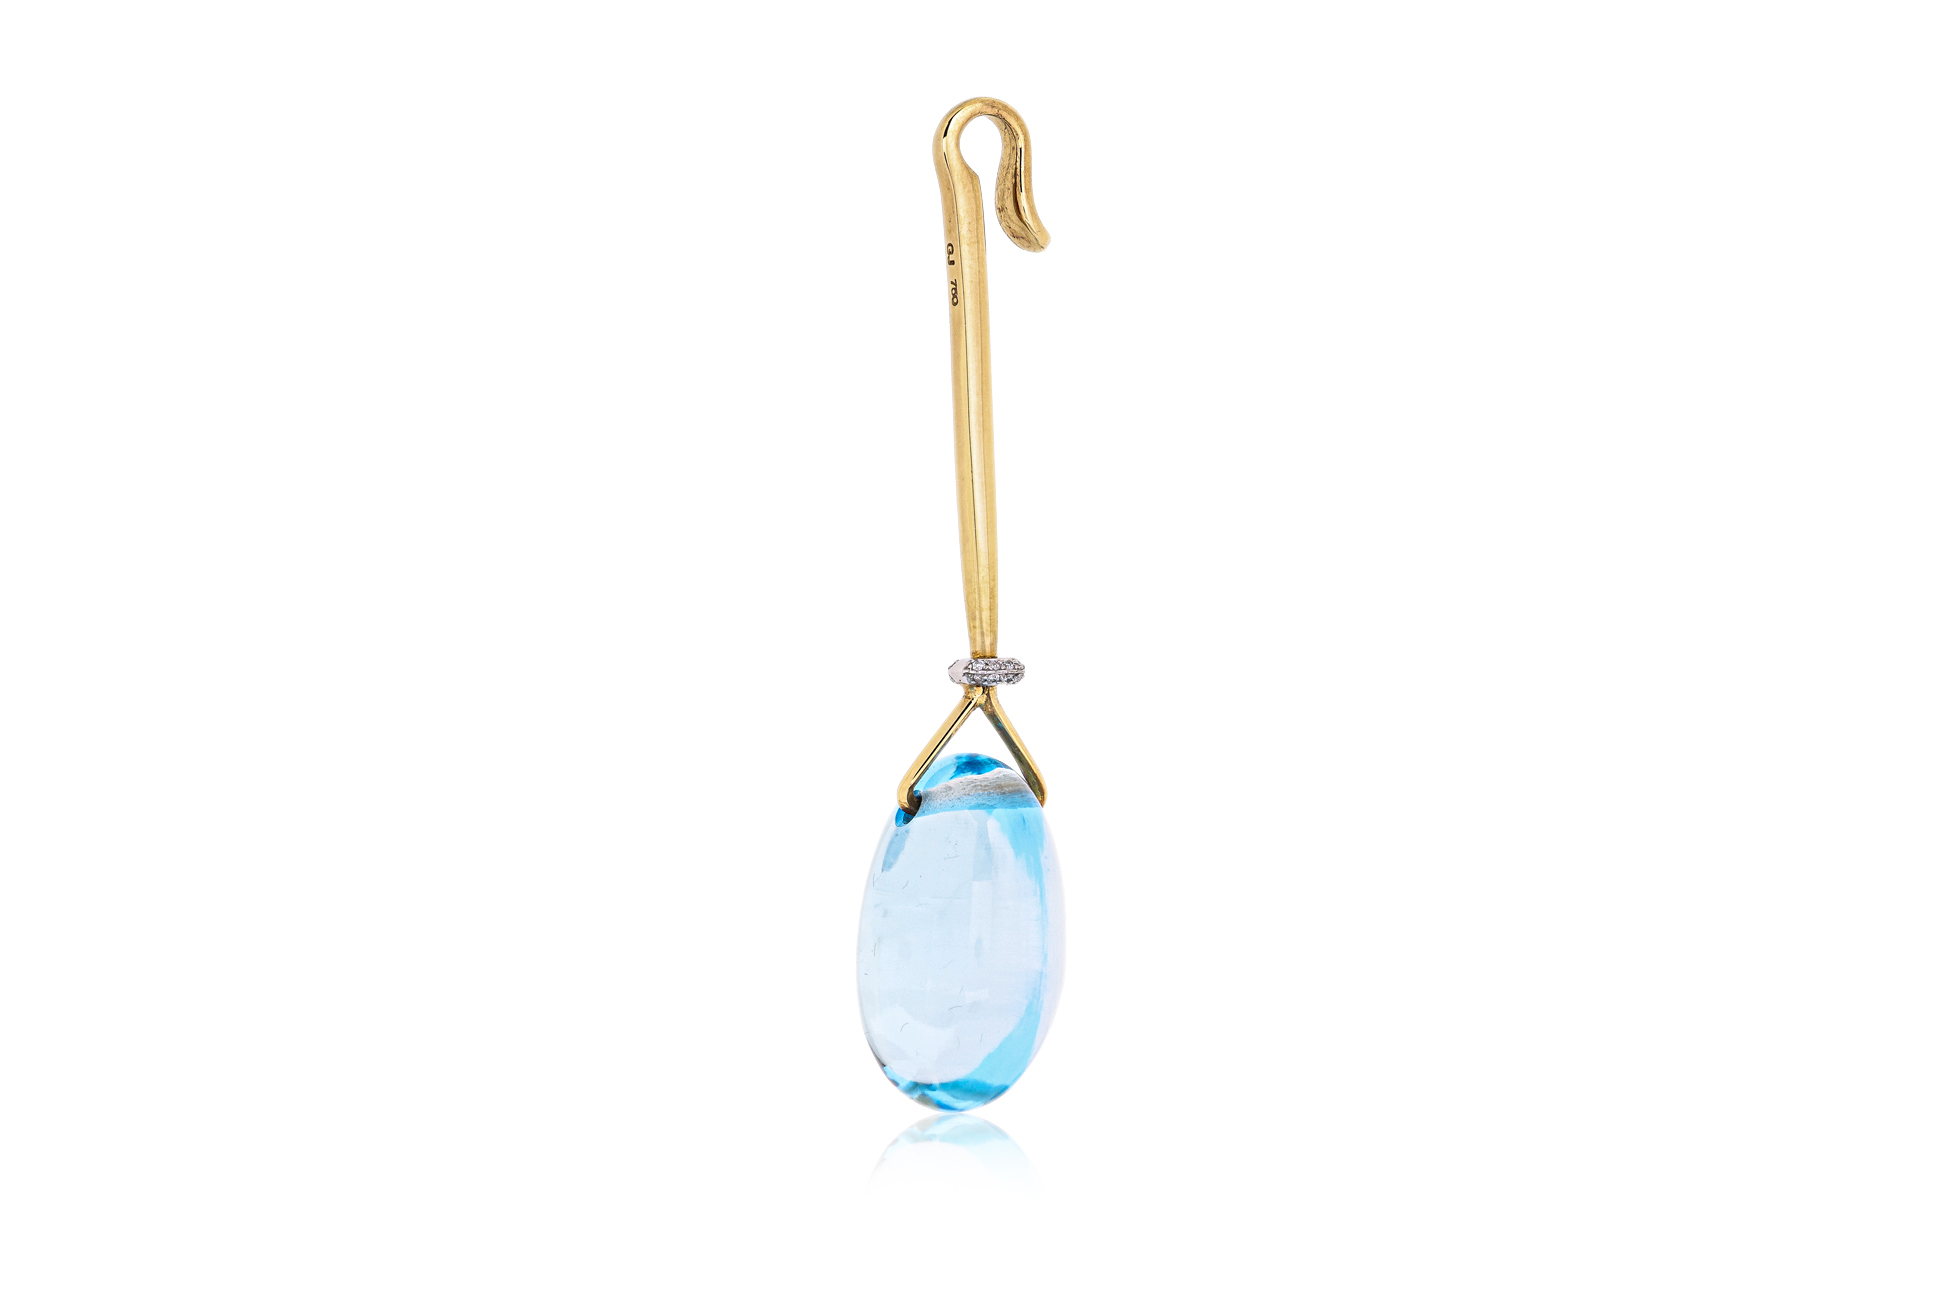 A BLUE TOPAZ AND DIAMOND 'DEW DROP' PENDANT BY GEORG JENSEN - Image 3 of 5